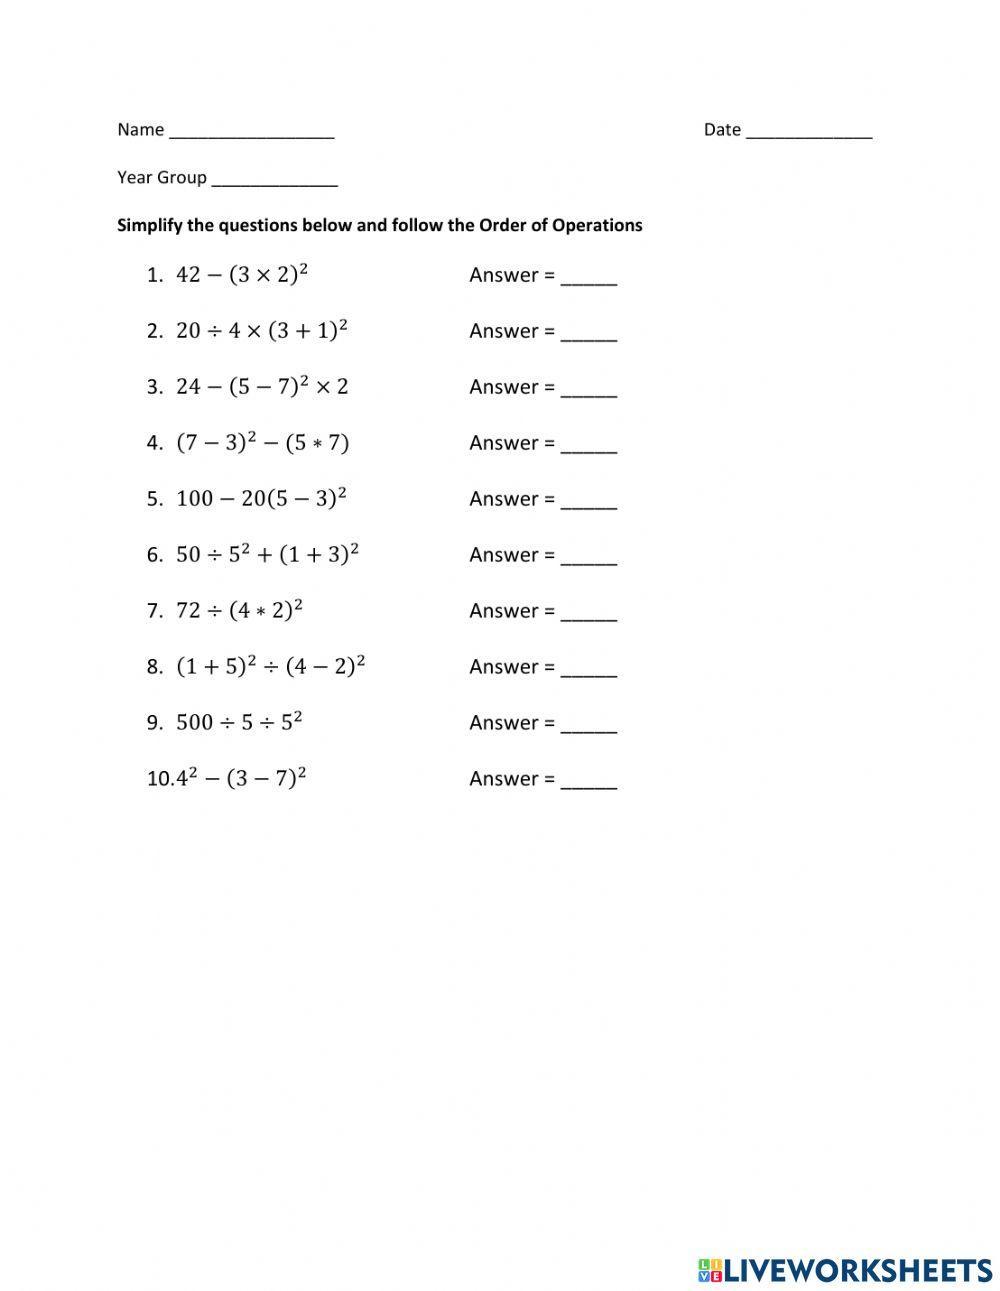 Order of Operations - 3 Steps with Exponents